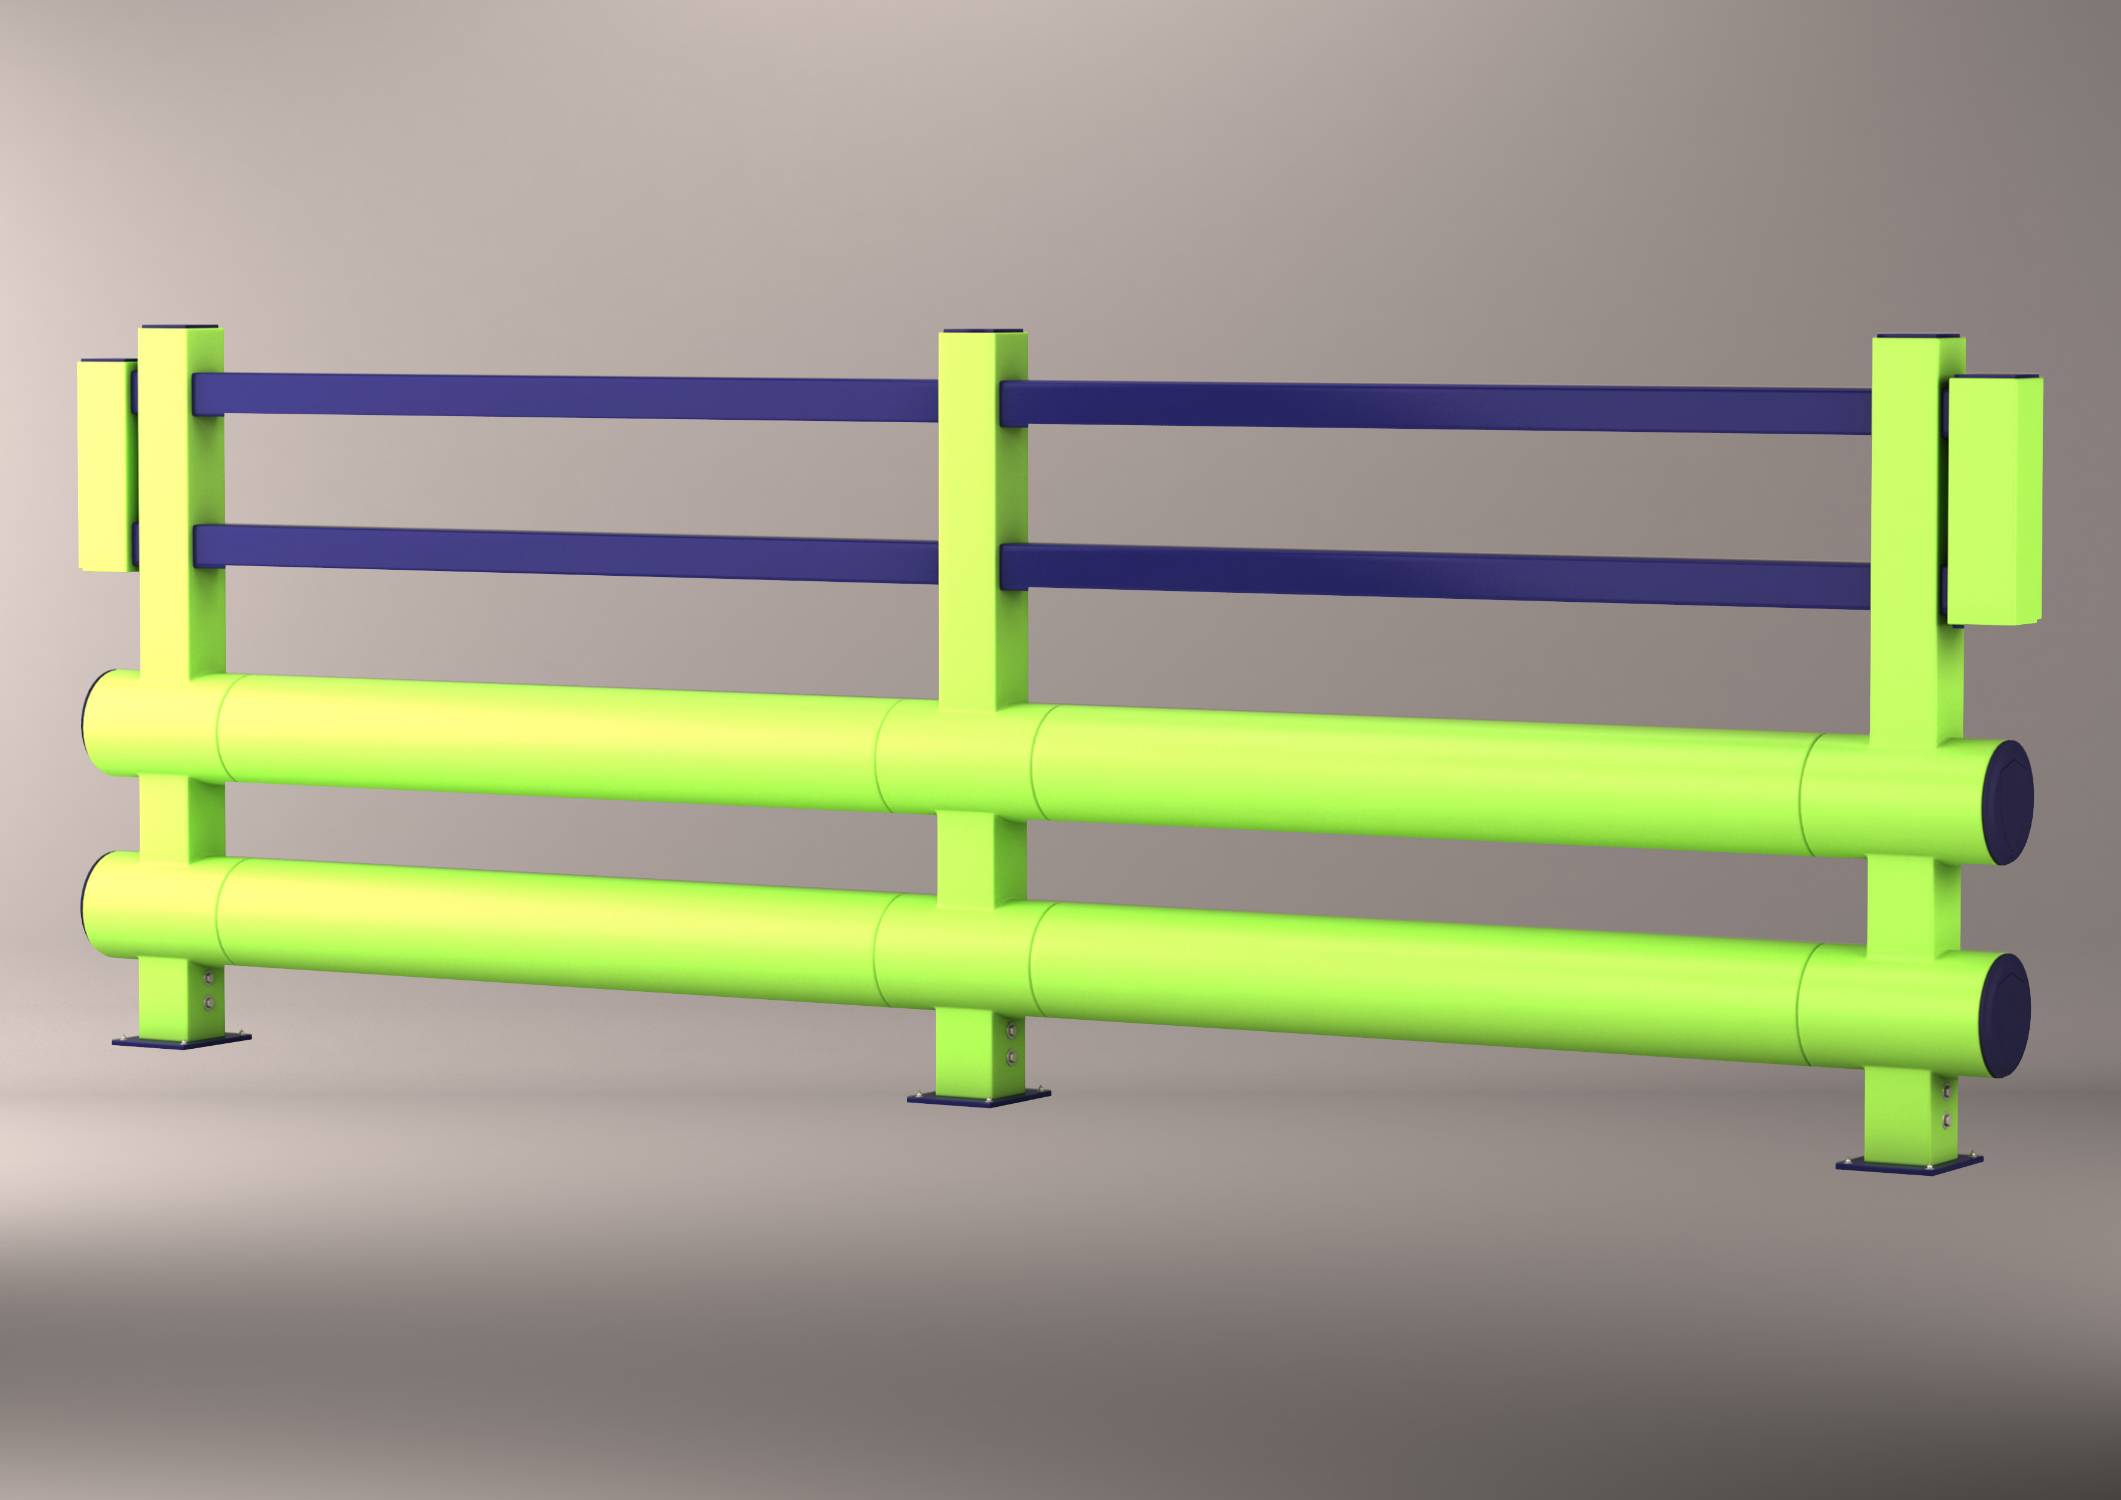 Pedestrian Safety Barrier (Double Bumper) - PAS 13 Tested Polymer Safety Barrier